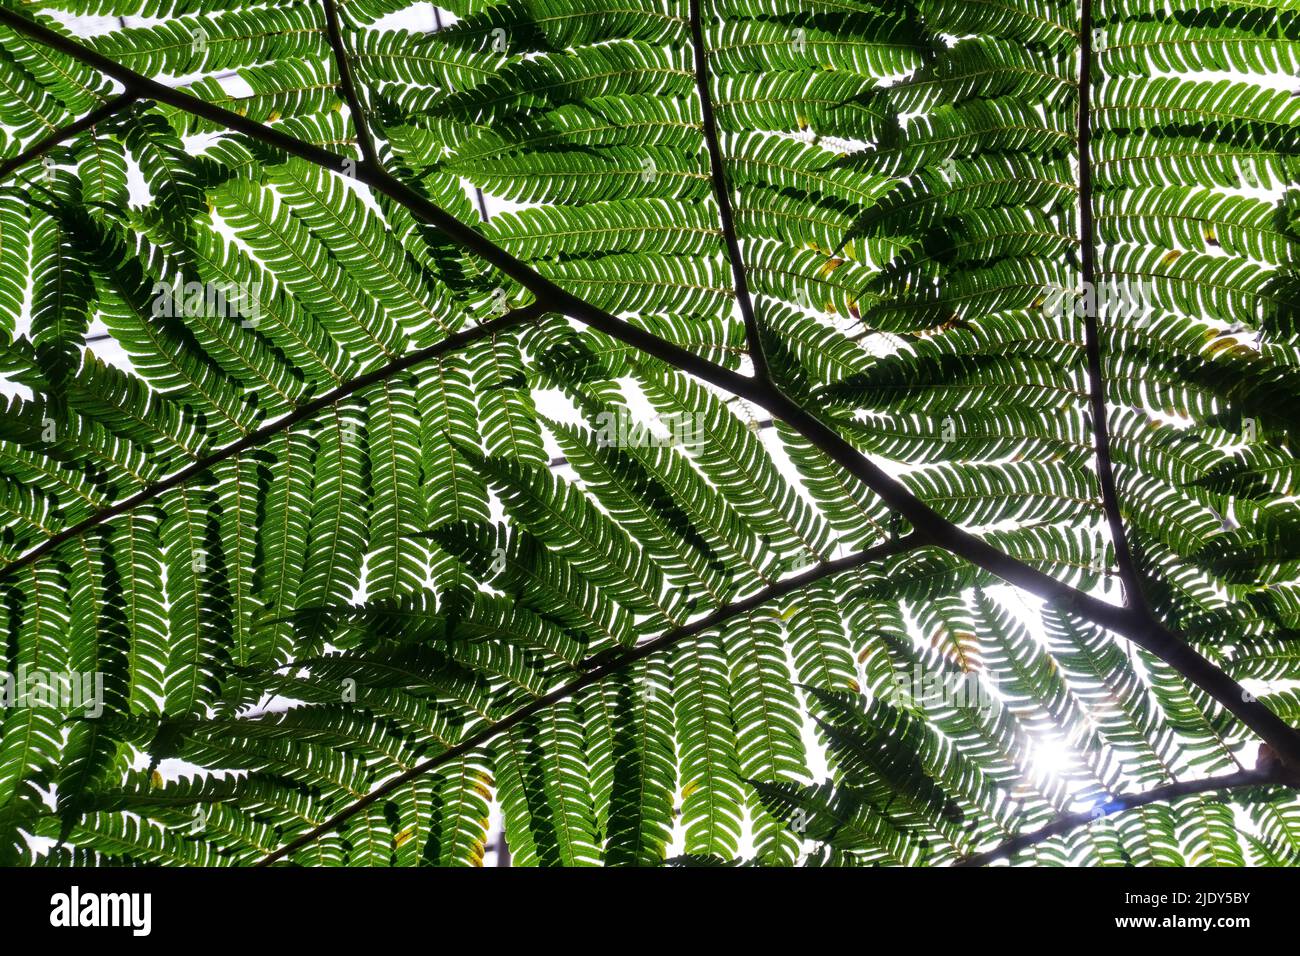 Giant green fern branch background close up Stock Photo